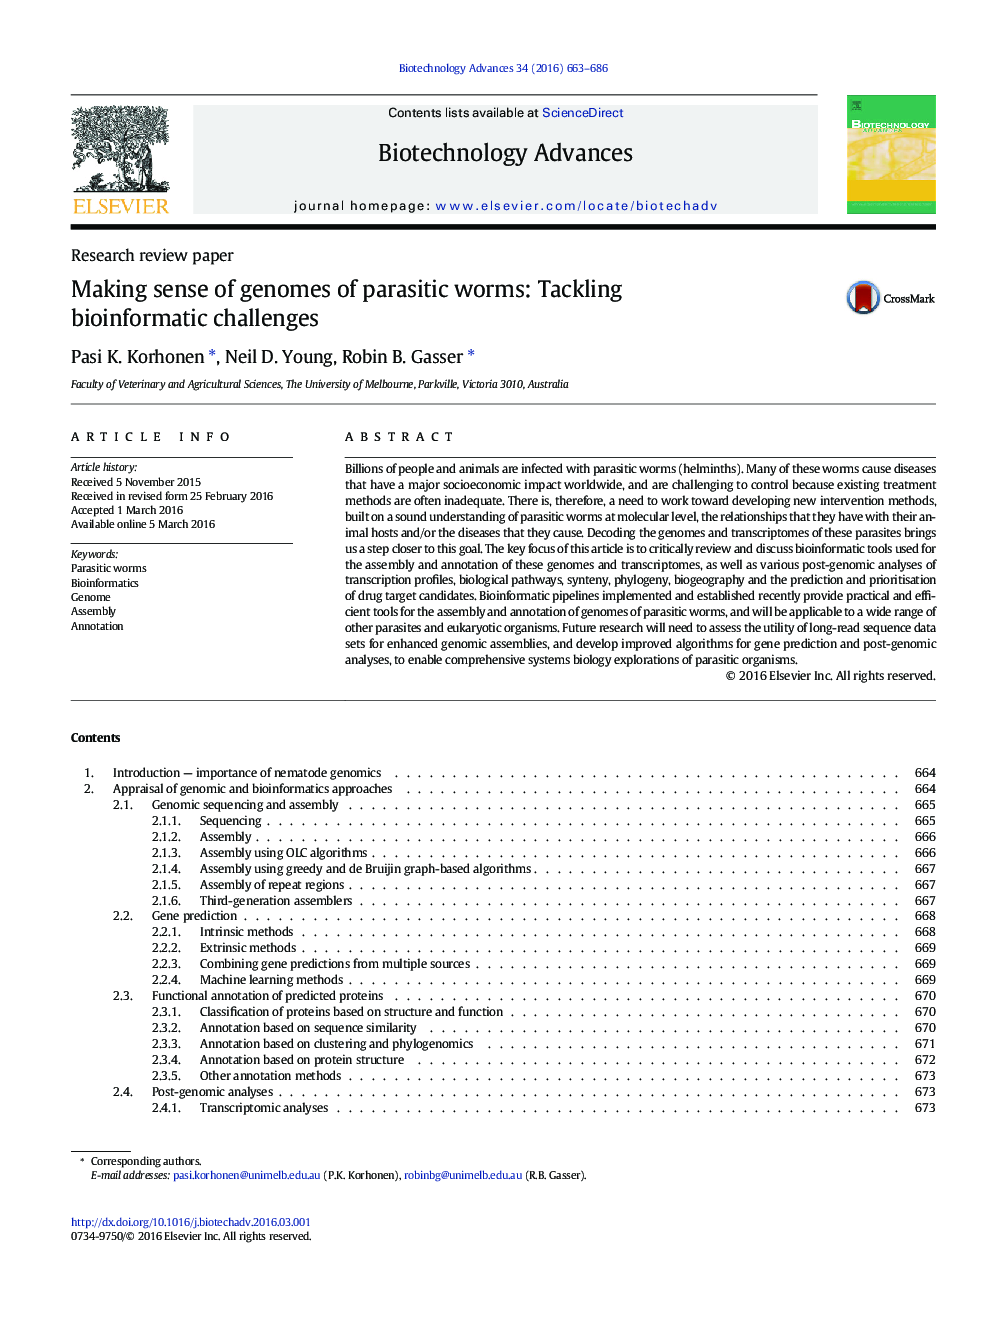 Research review paperMaking sense of genomes of parasitic worms: Tackling bioinformatic challenges